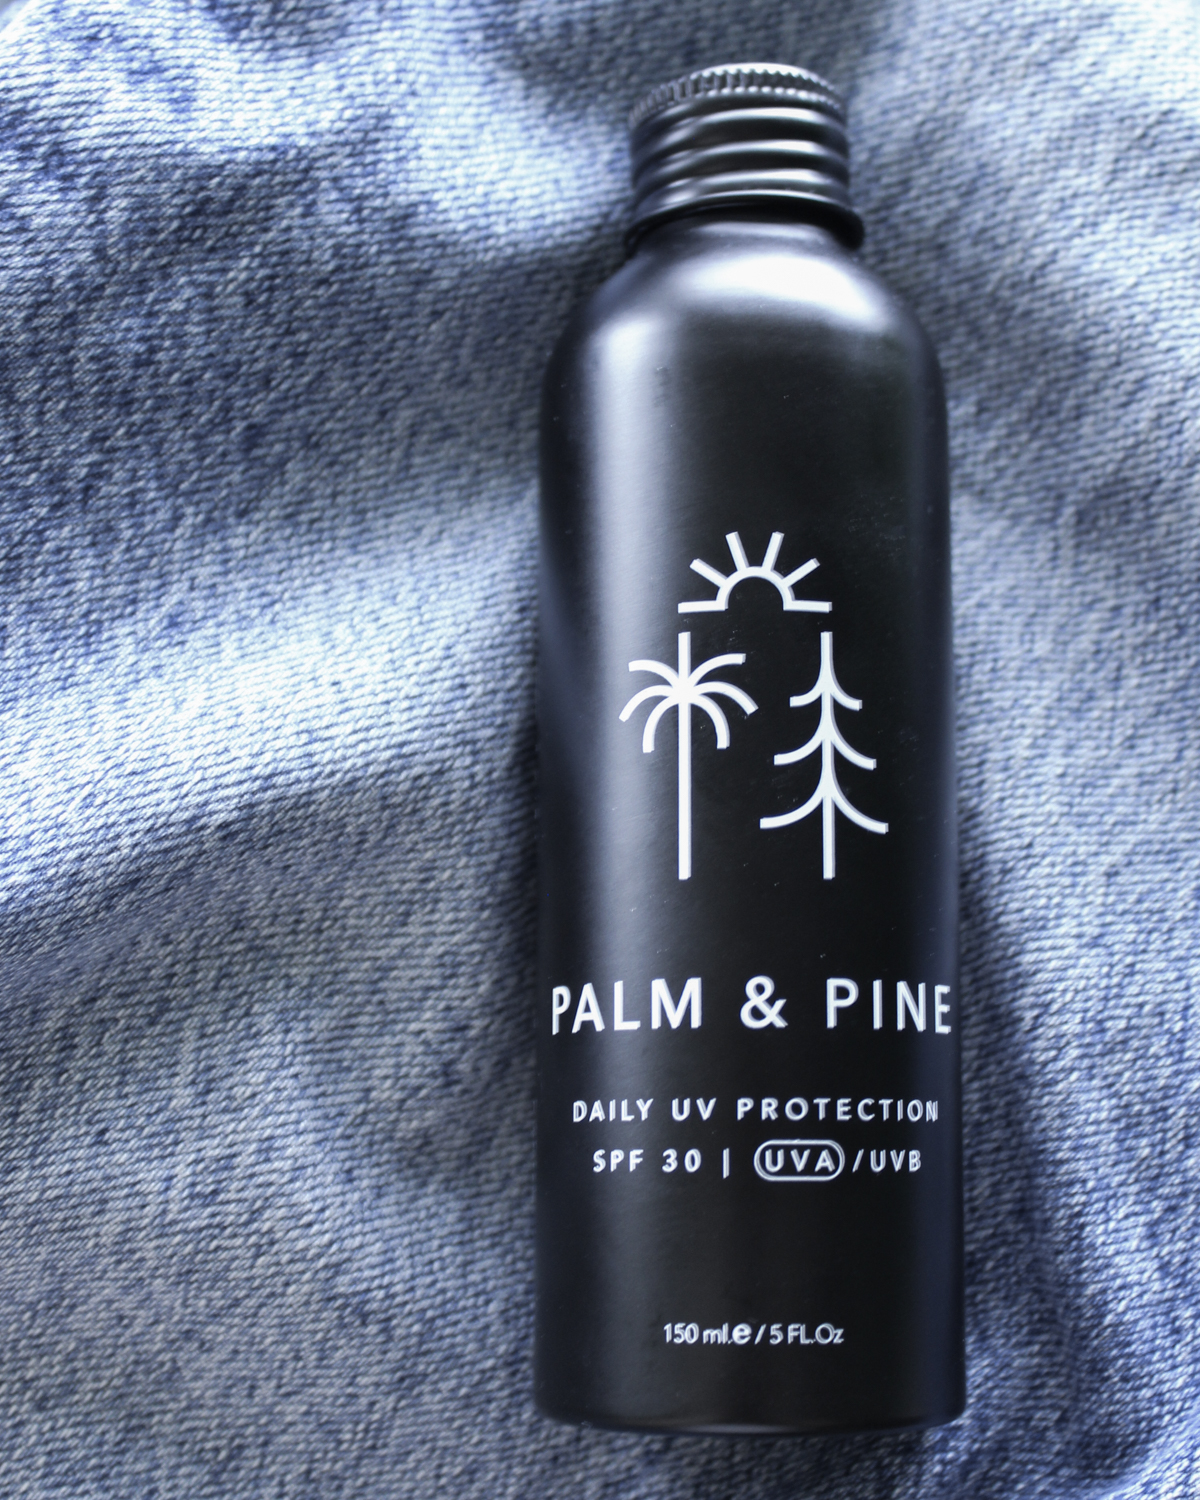 Palm & Pine SPF 30 review